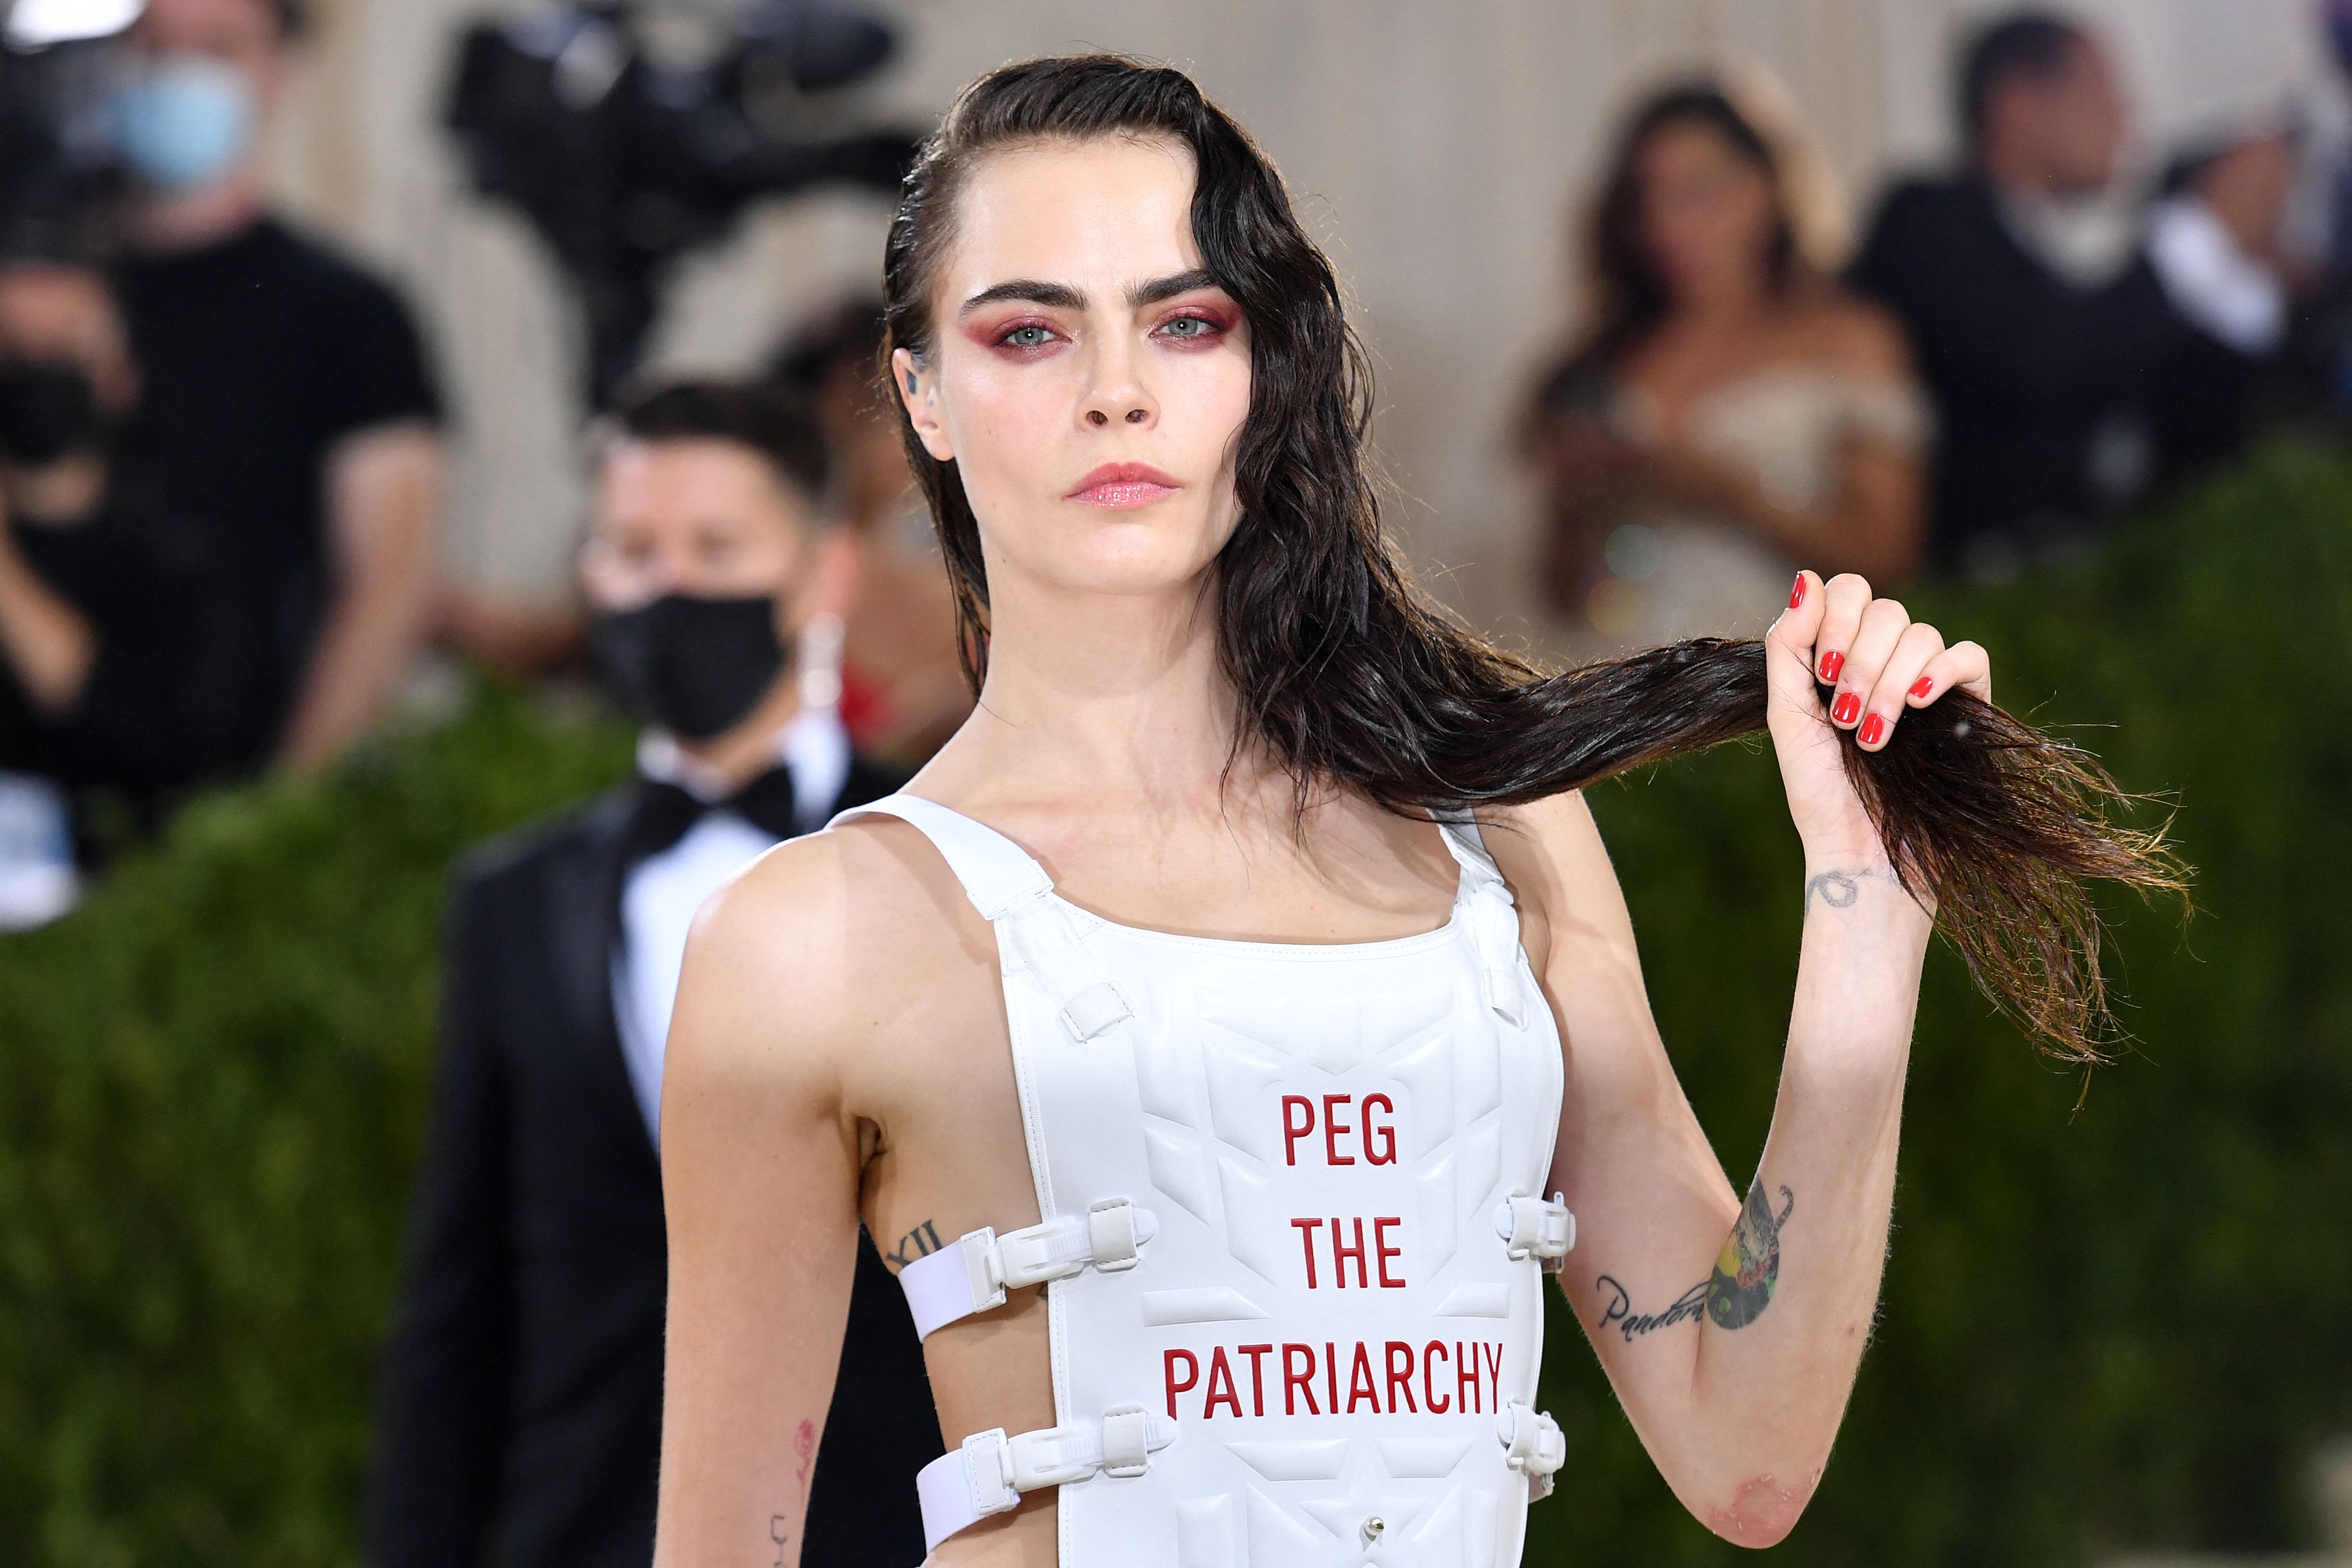 The Artist Behind Peg the Patriarchy Wishes Cara Delevingne Gave Her Credit pic